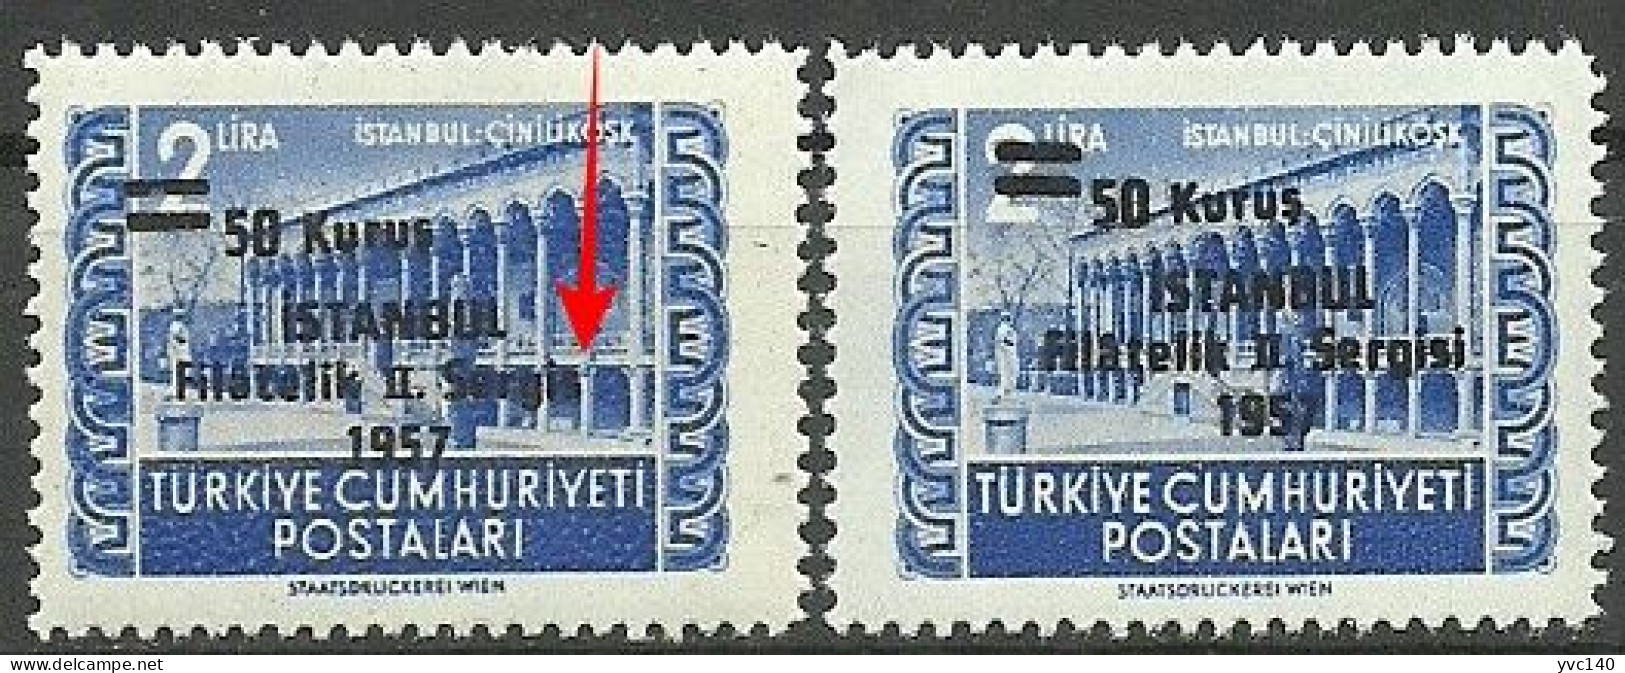 Turkey; 1957 Surcharged Commemorative Stamp For Istanbul Philately Exhibition ERROR "Missing Surcharge" - Ongebruikt